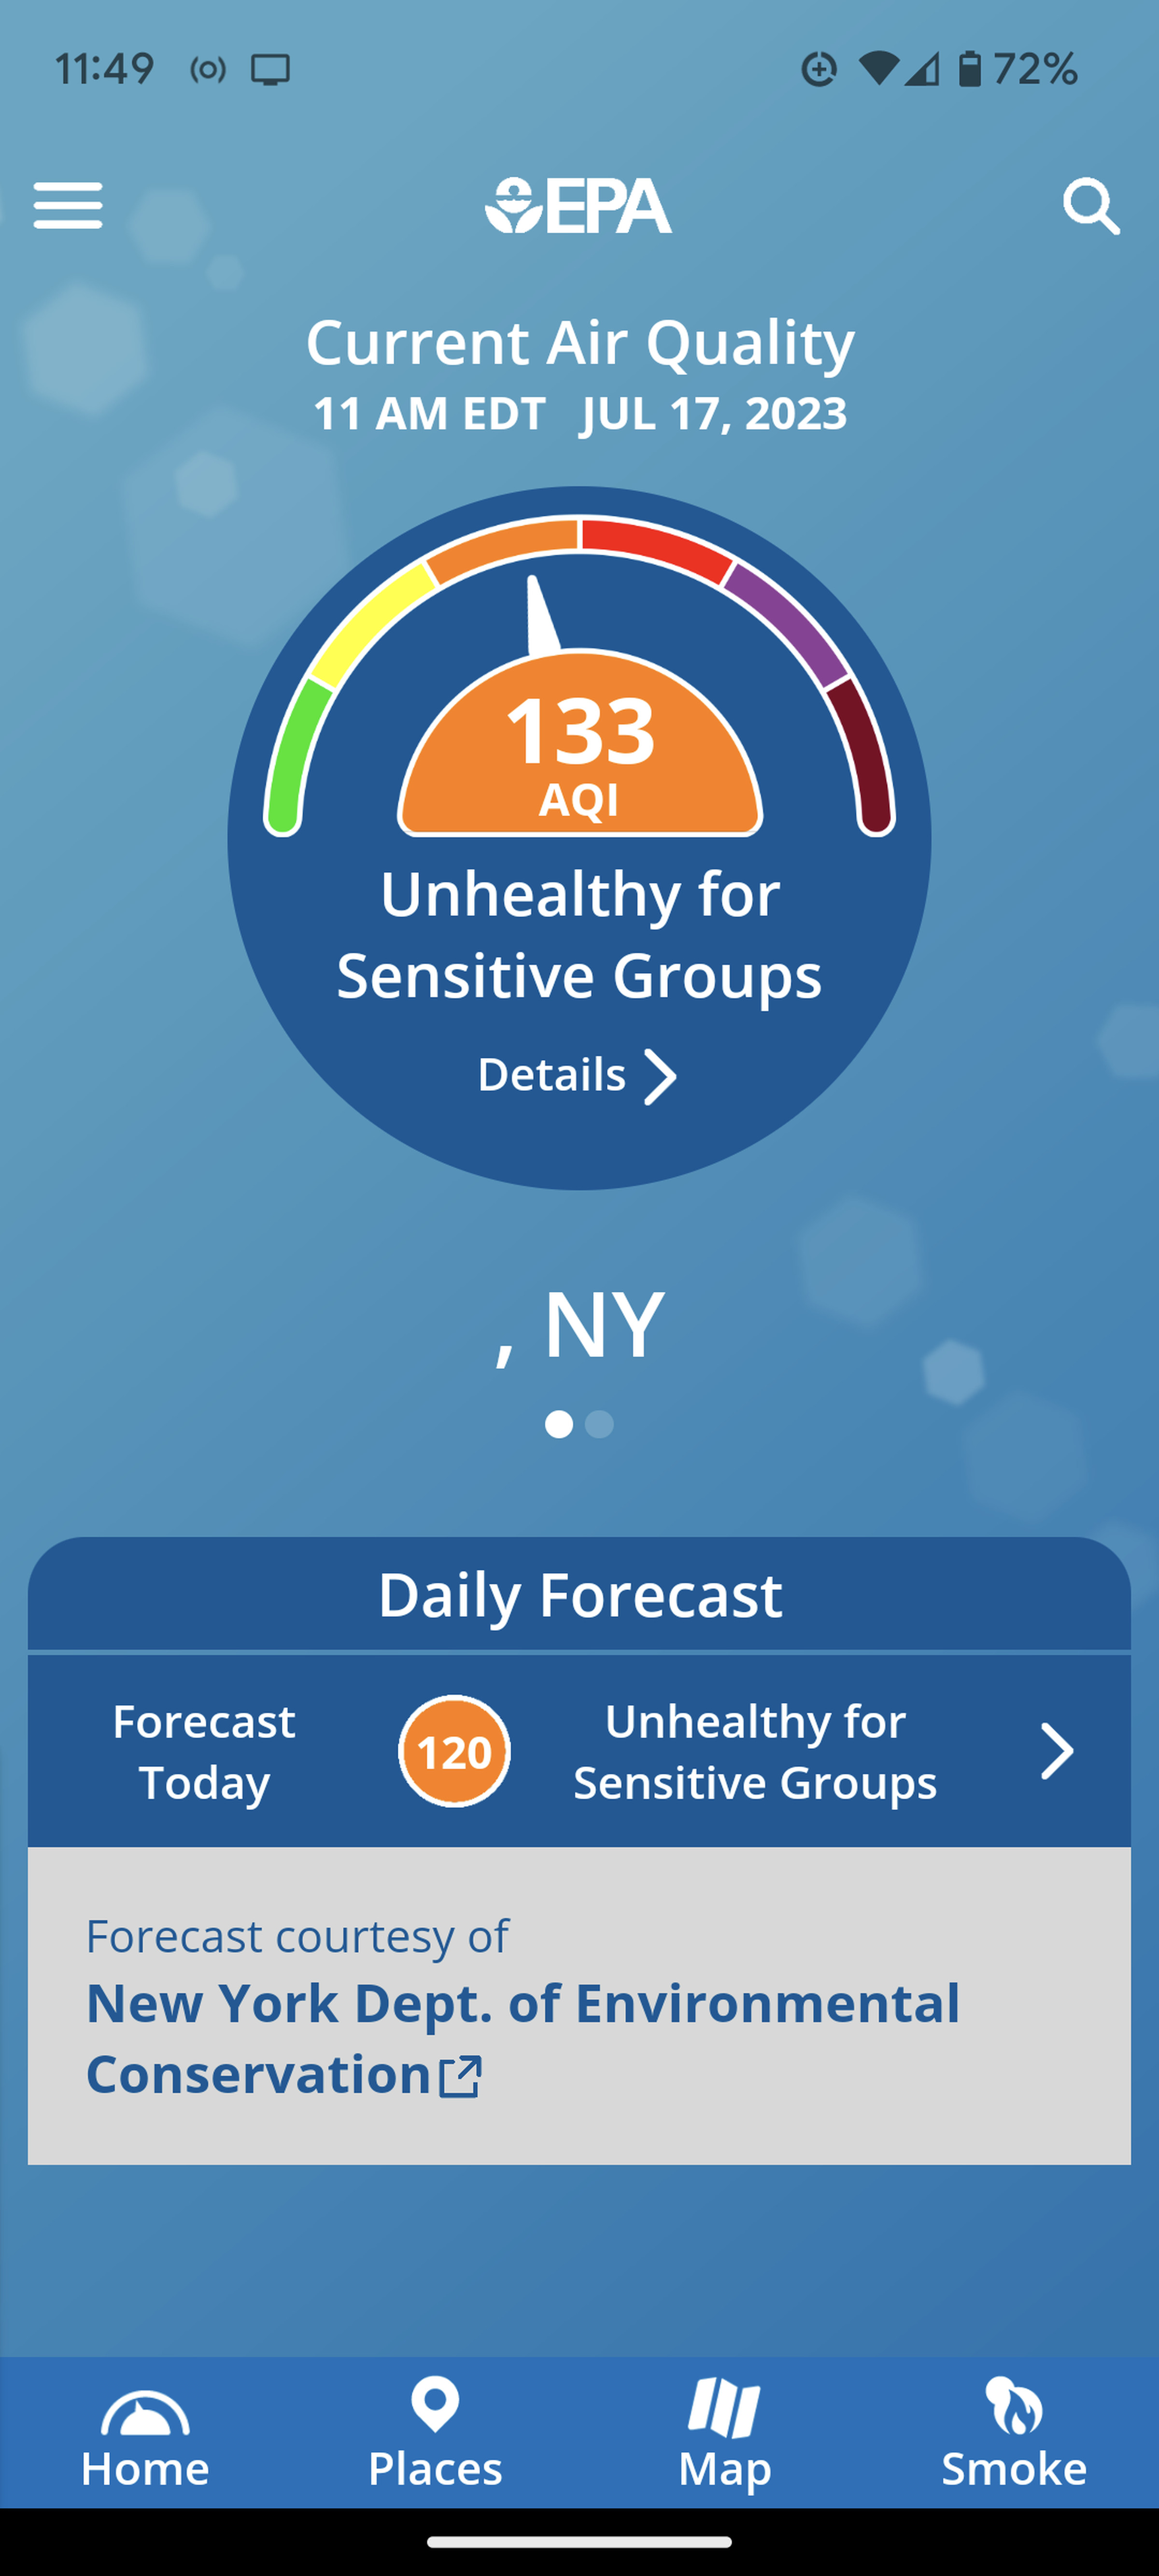 Mobile screen headed EPA, Current Air Quality, showing the ratings as 133 on a dial, and with the daily forecast beneath.